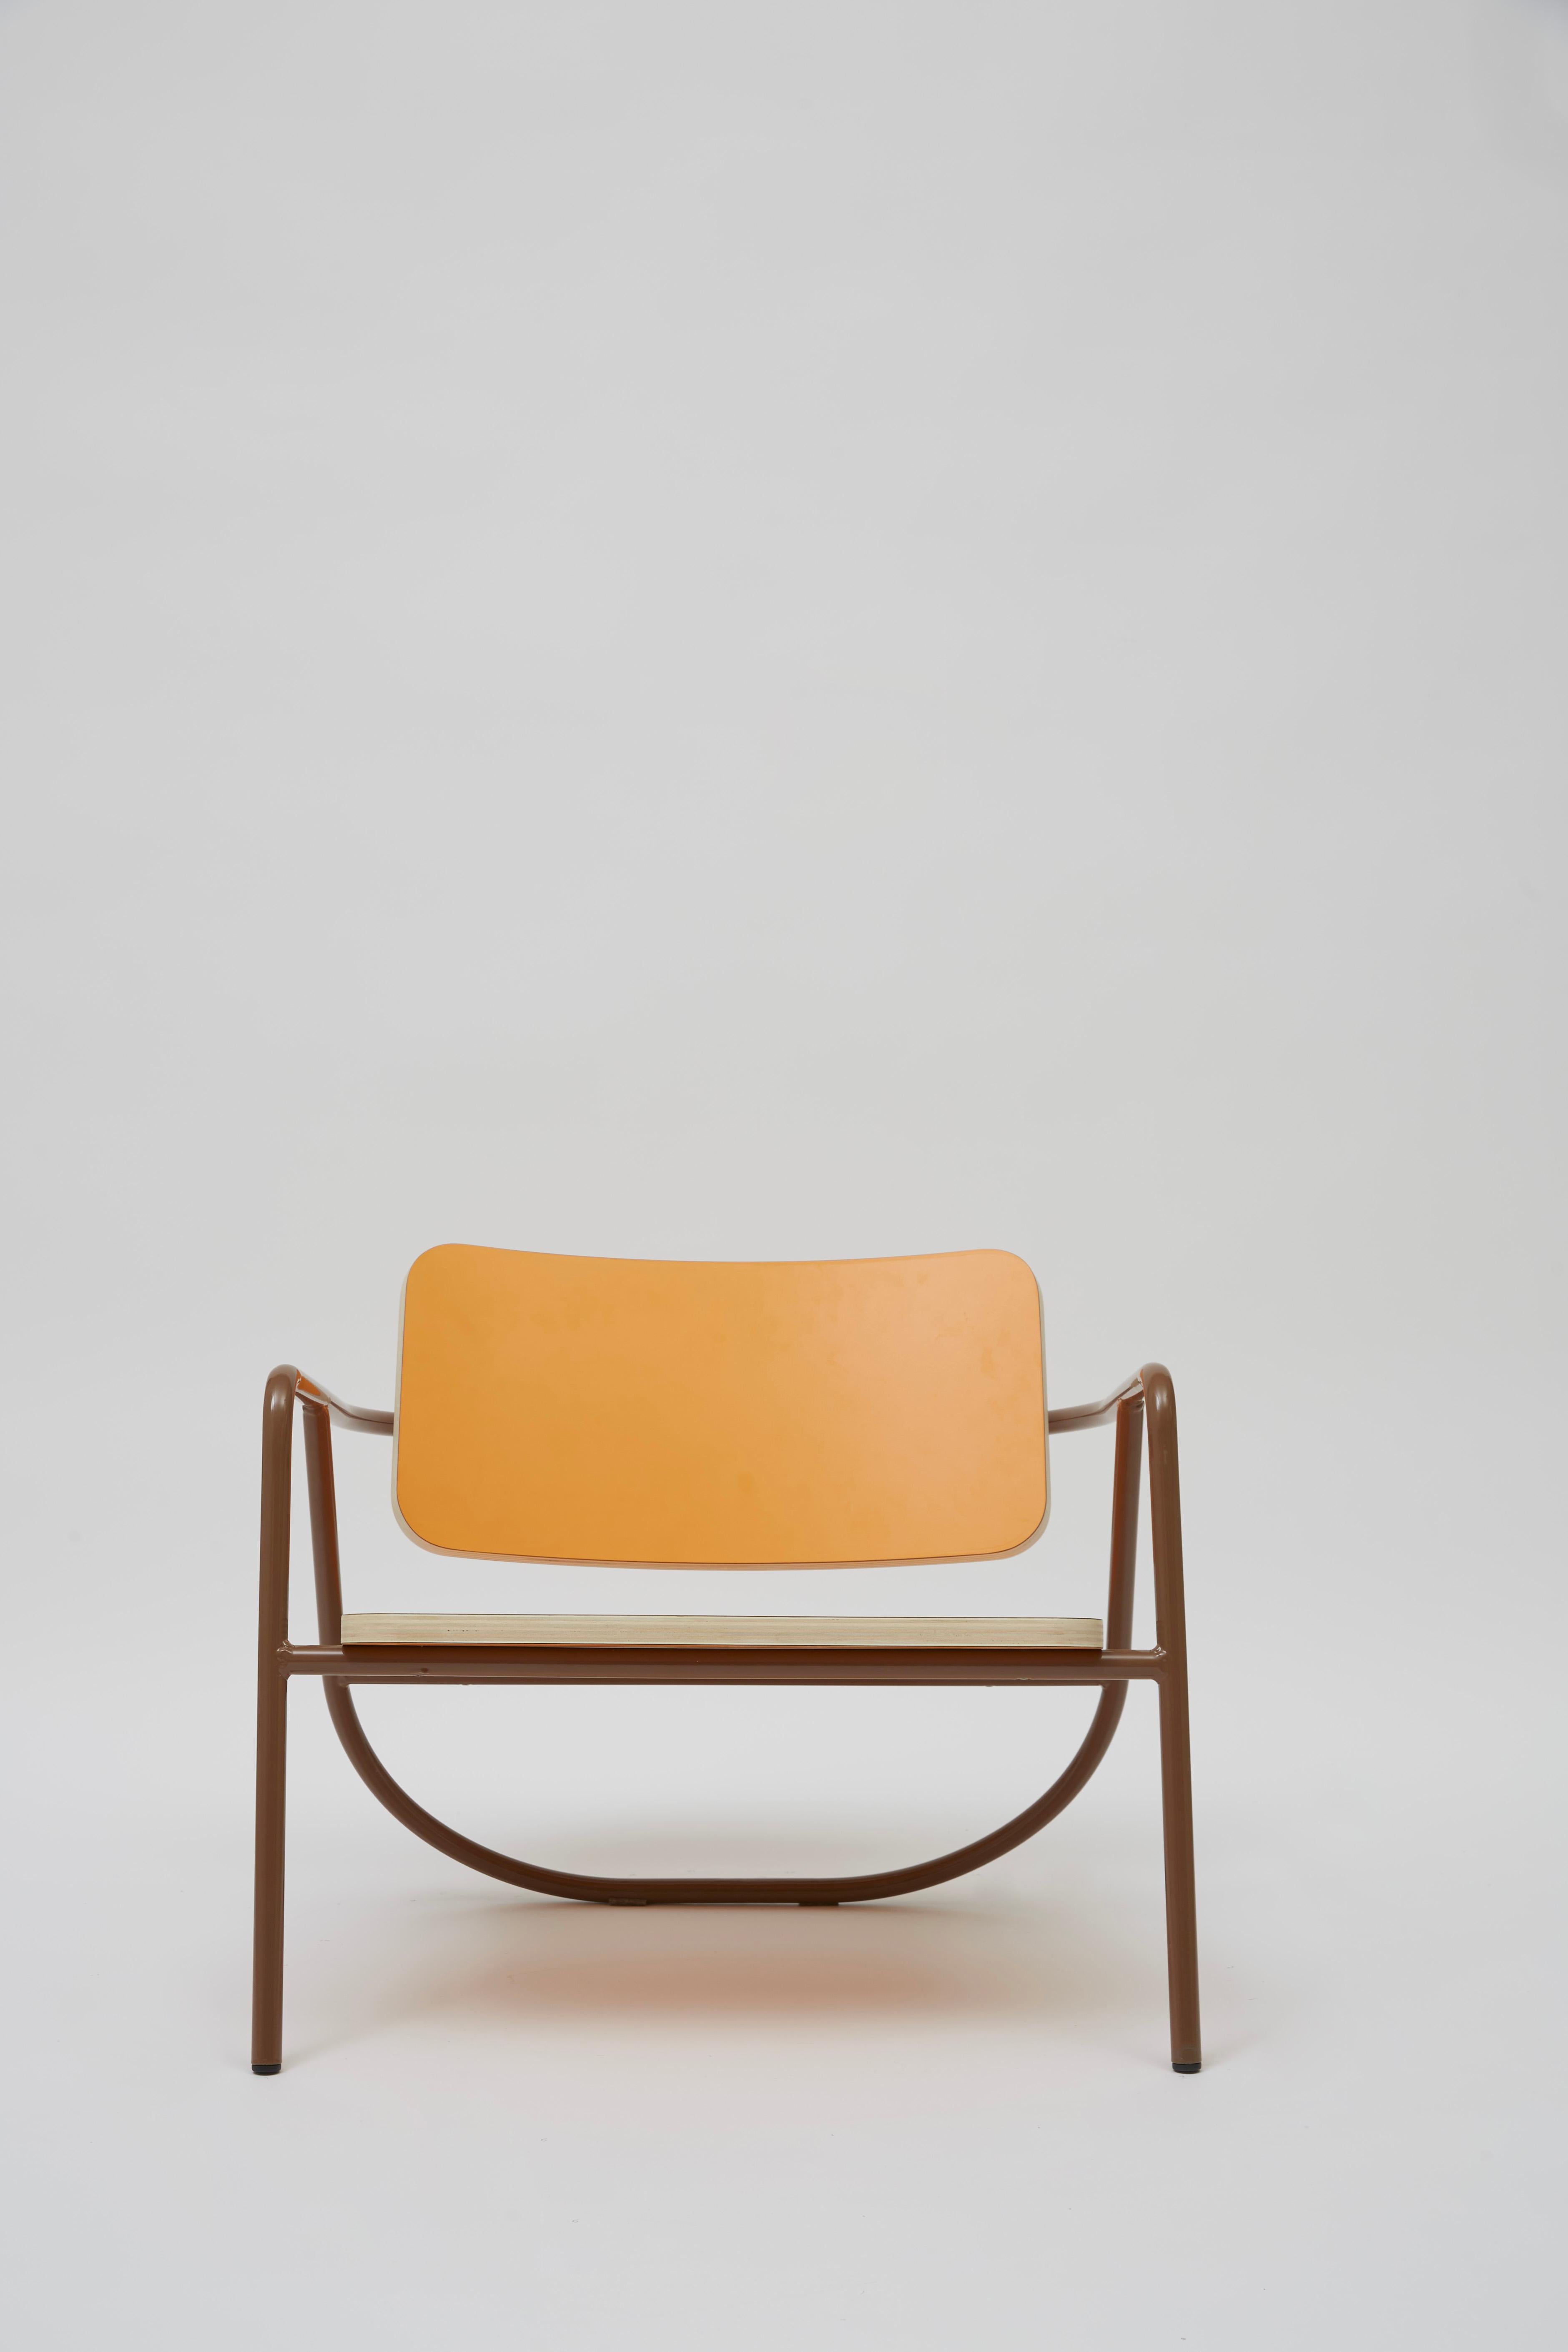 Brutal and minimalist both in its design and the choice of materials. This is La Misciù easy chair, made up of a bent steel structure and a birch plywood top.